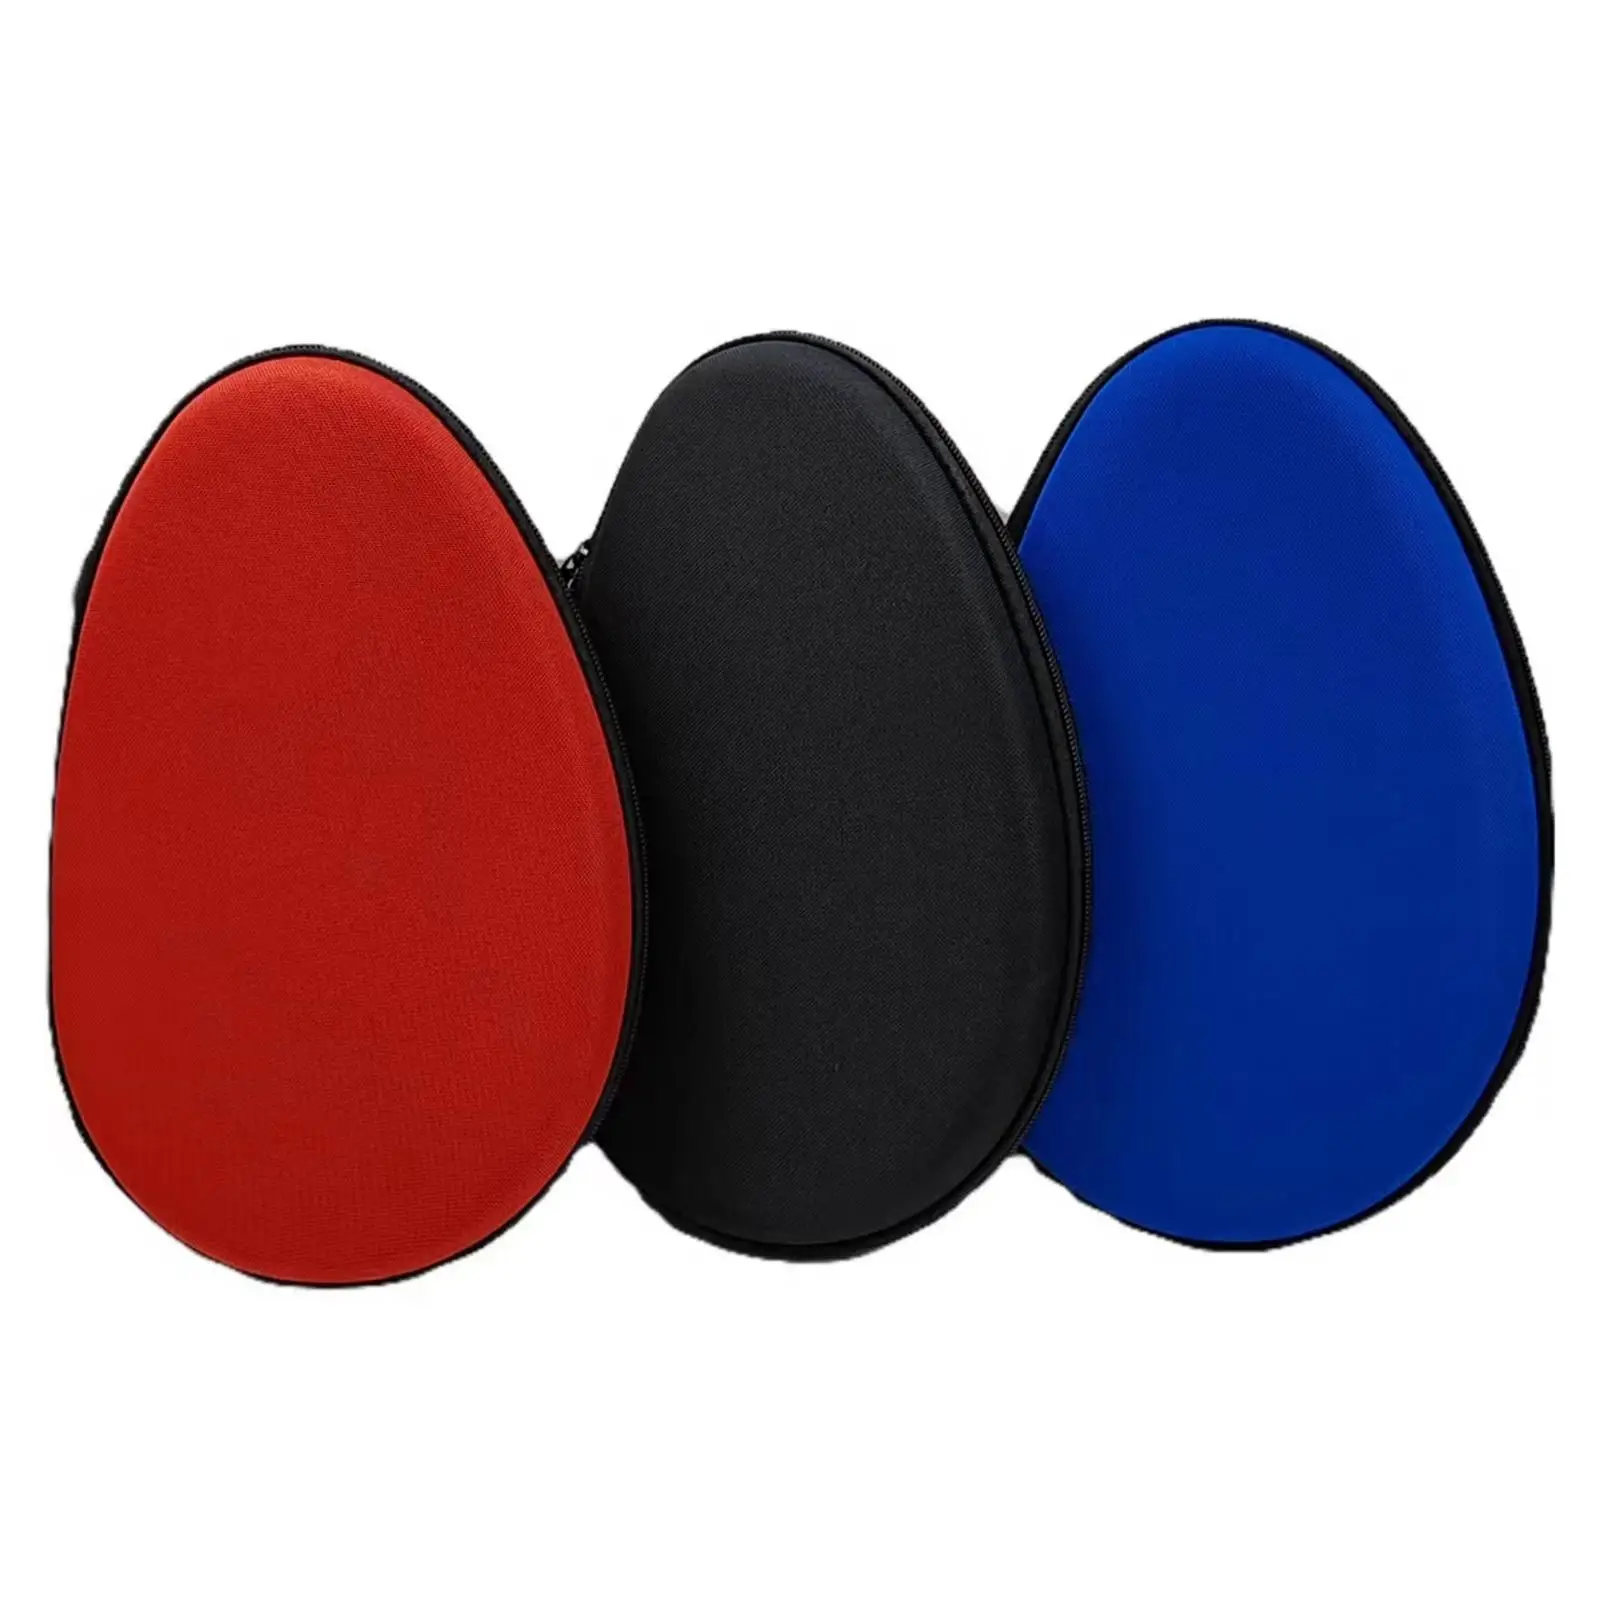 Portable Table Tennis Racket Case Storage Case Reusable Sturdy Wear Resistant Ping Pong Paddle Bag for Outdoor Training Indoor